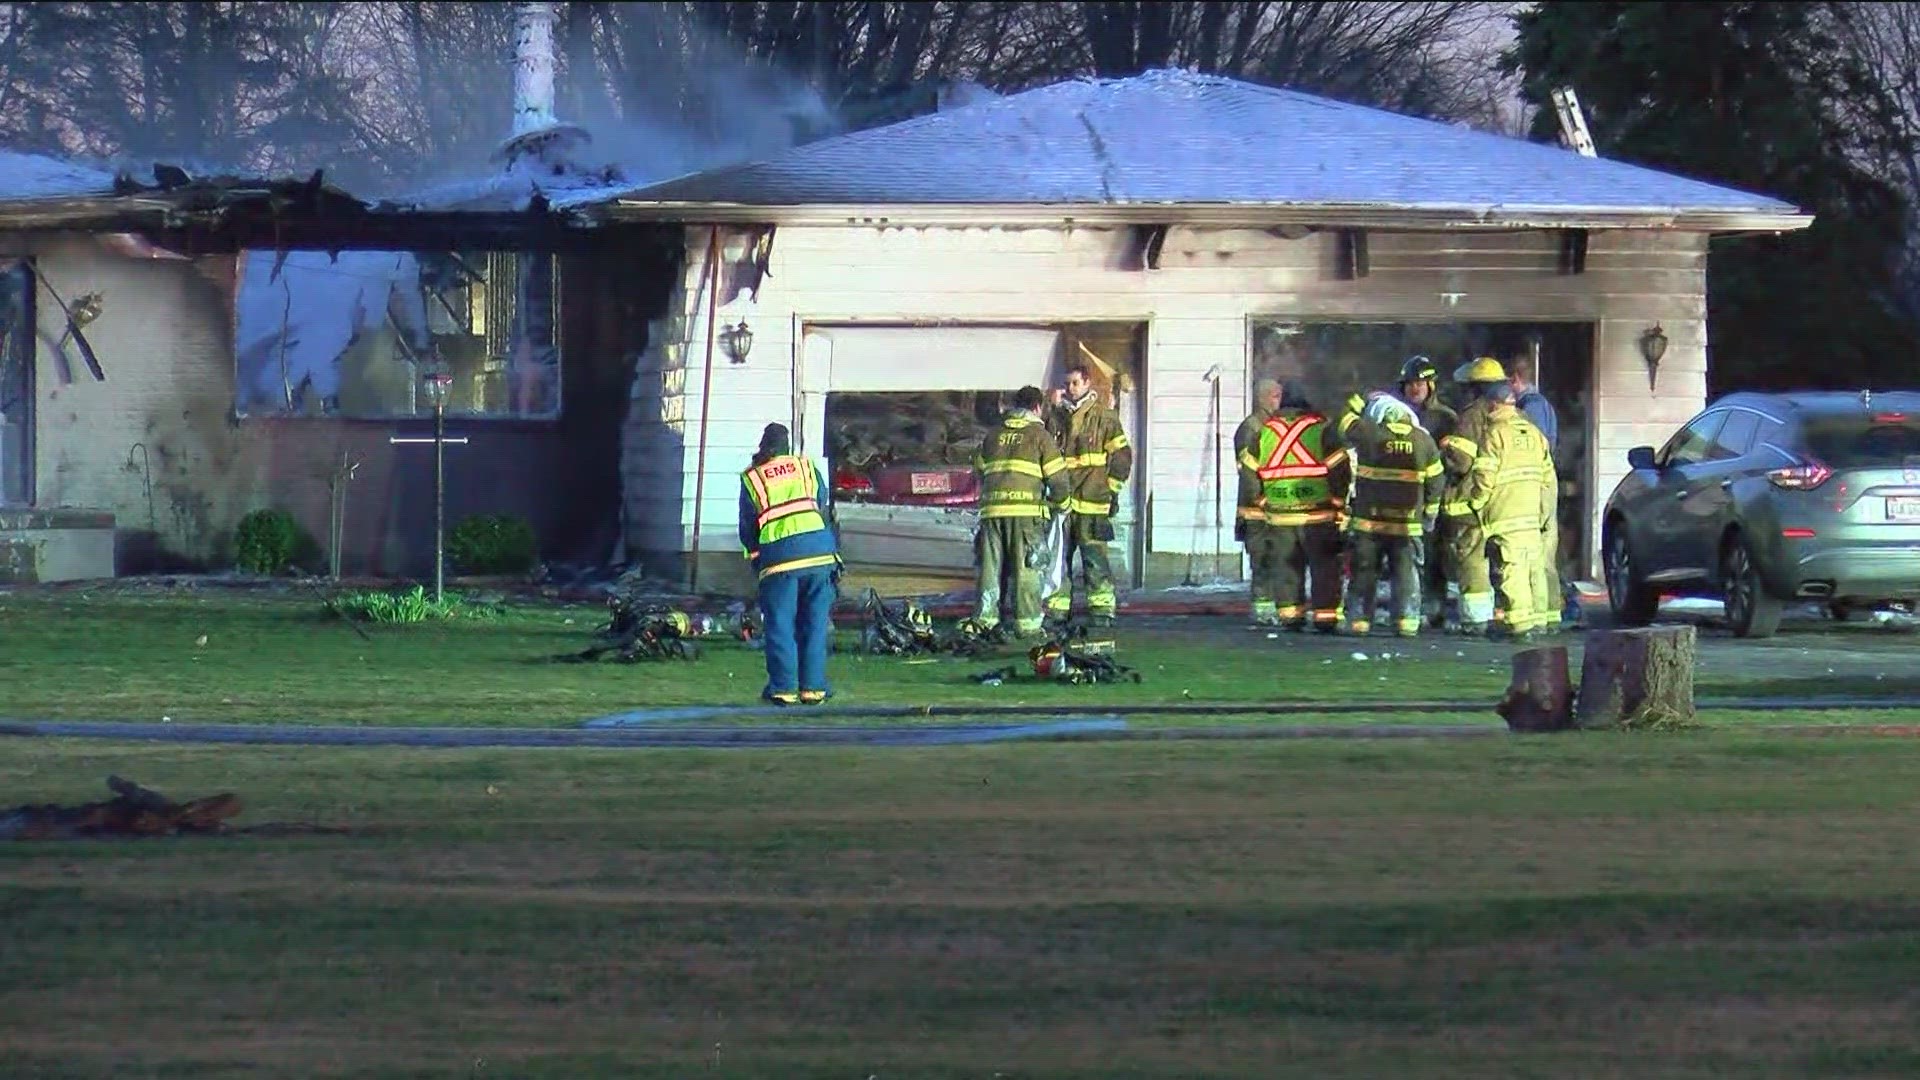 The fire broke out after 4 a.m. Tuesday. The family got out of the home safely, but a pet is believed to have died.